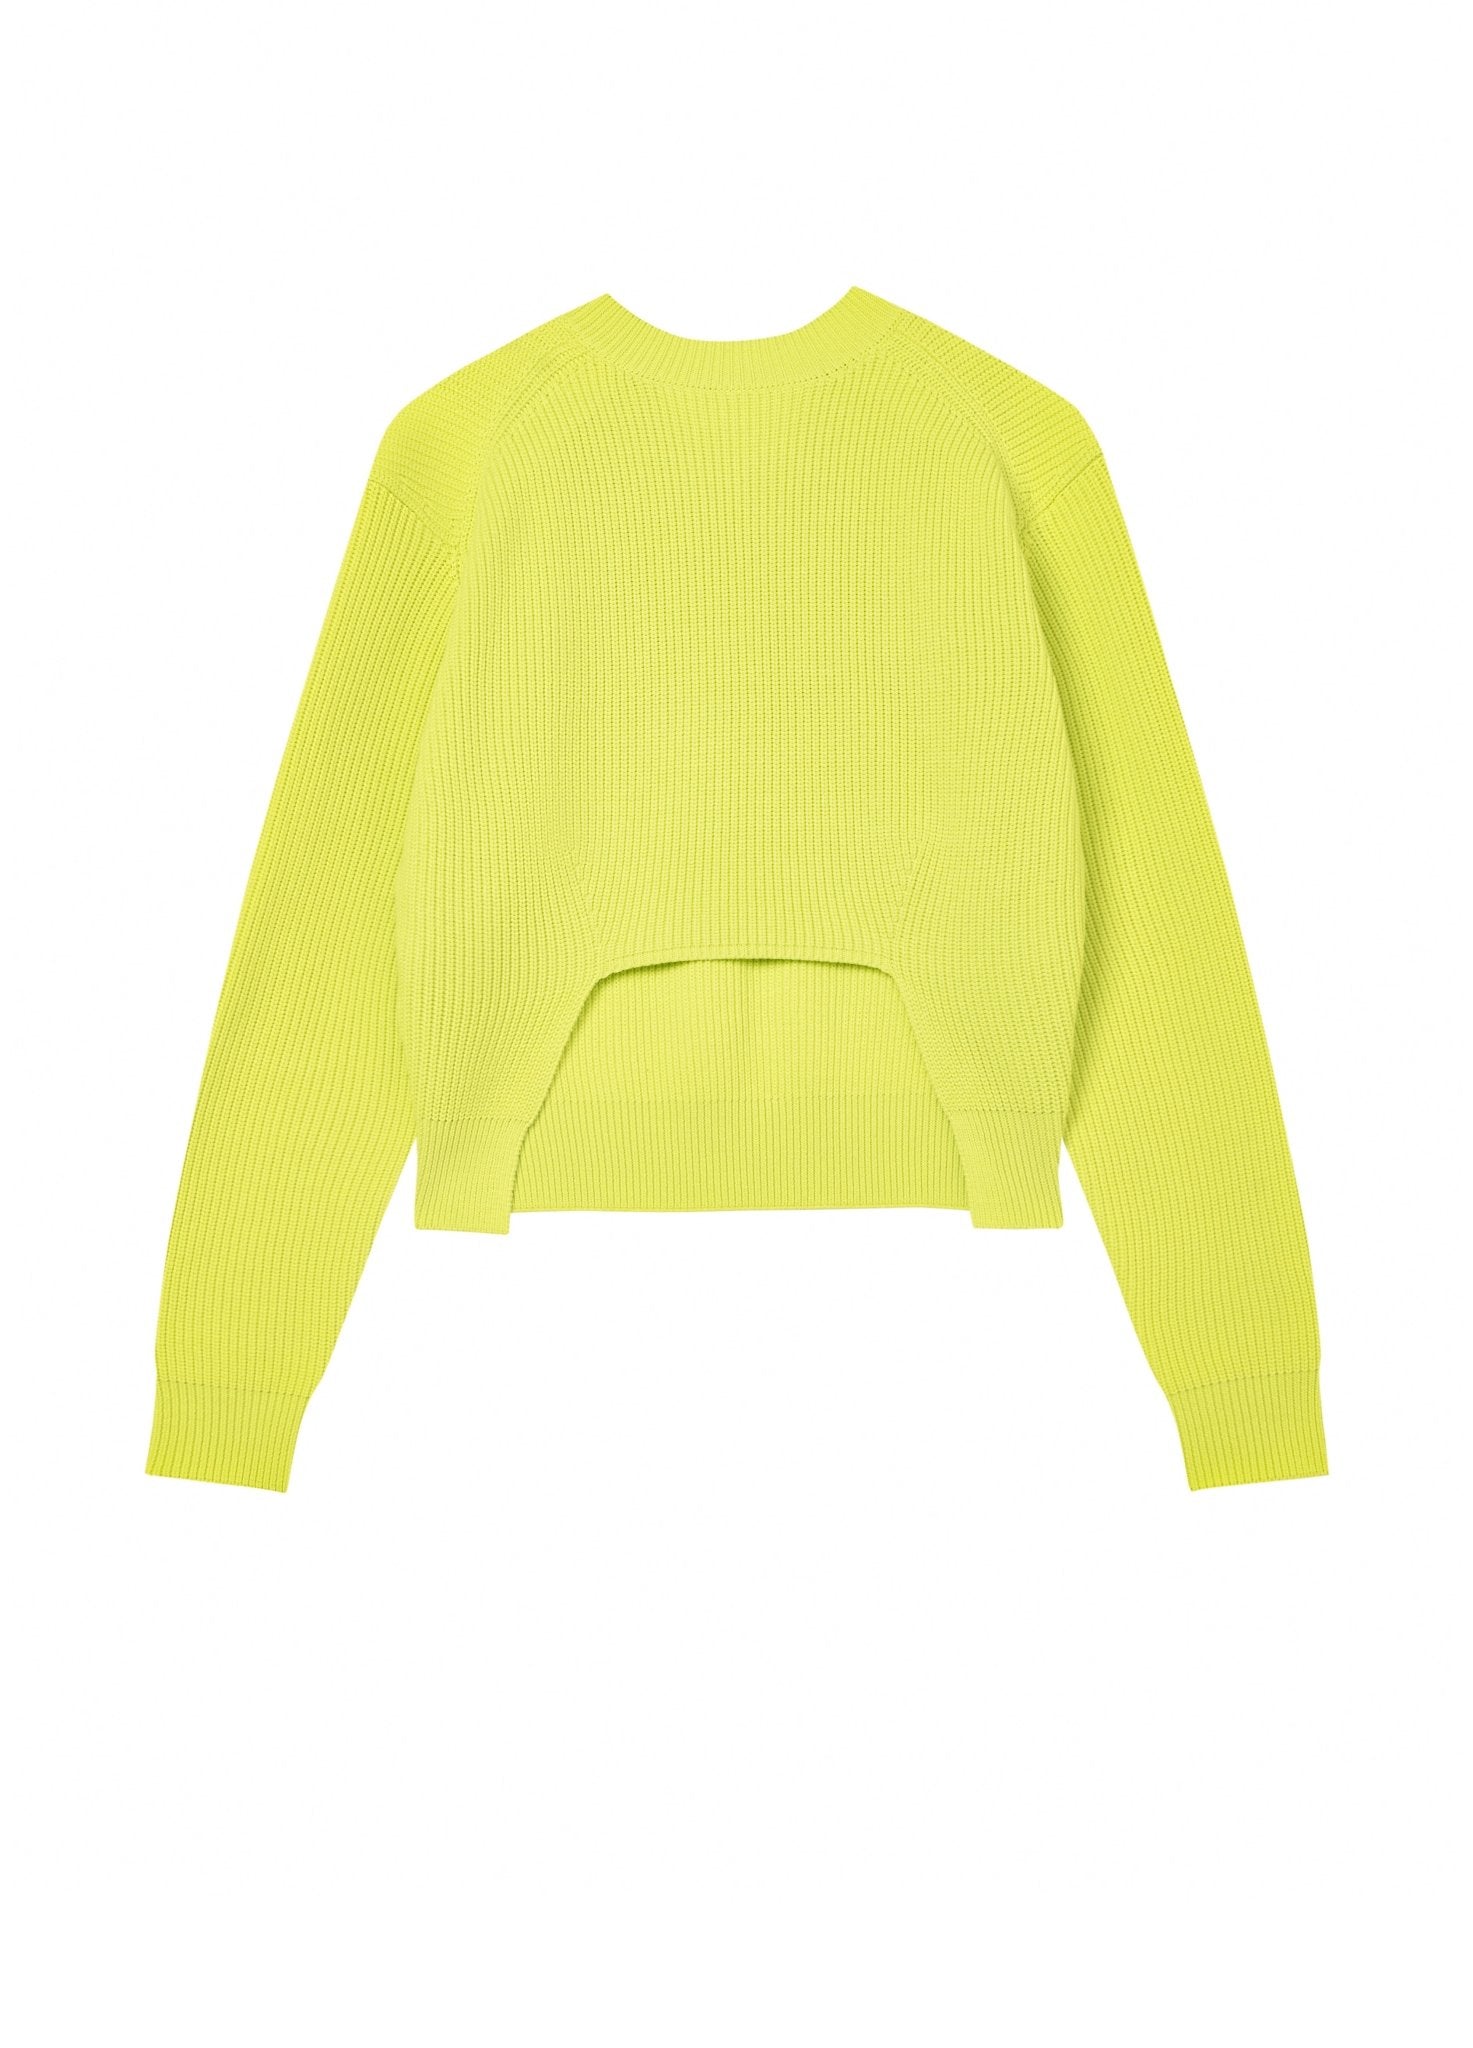 Sweater light yellow by JNBY Sweater JNBY   